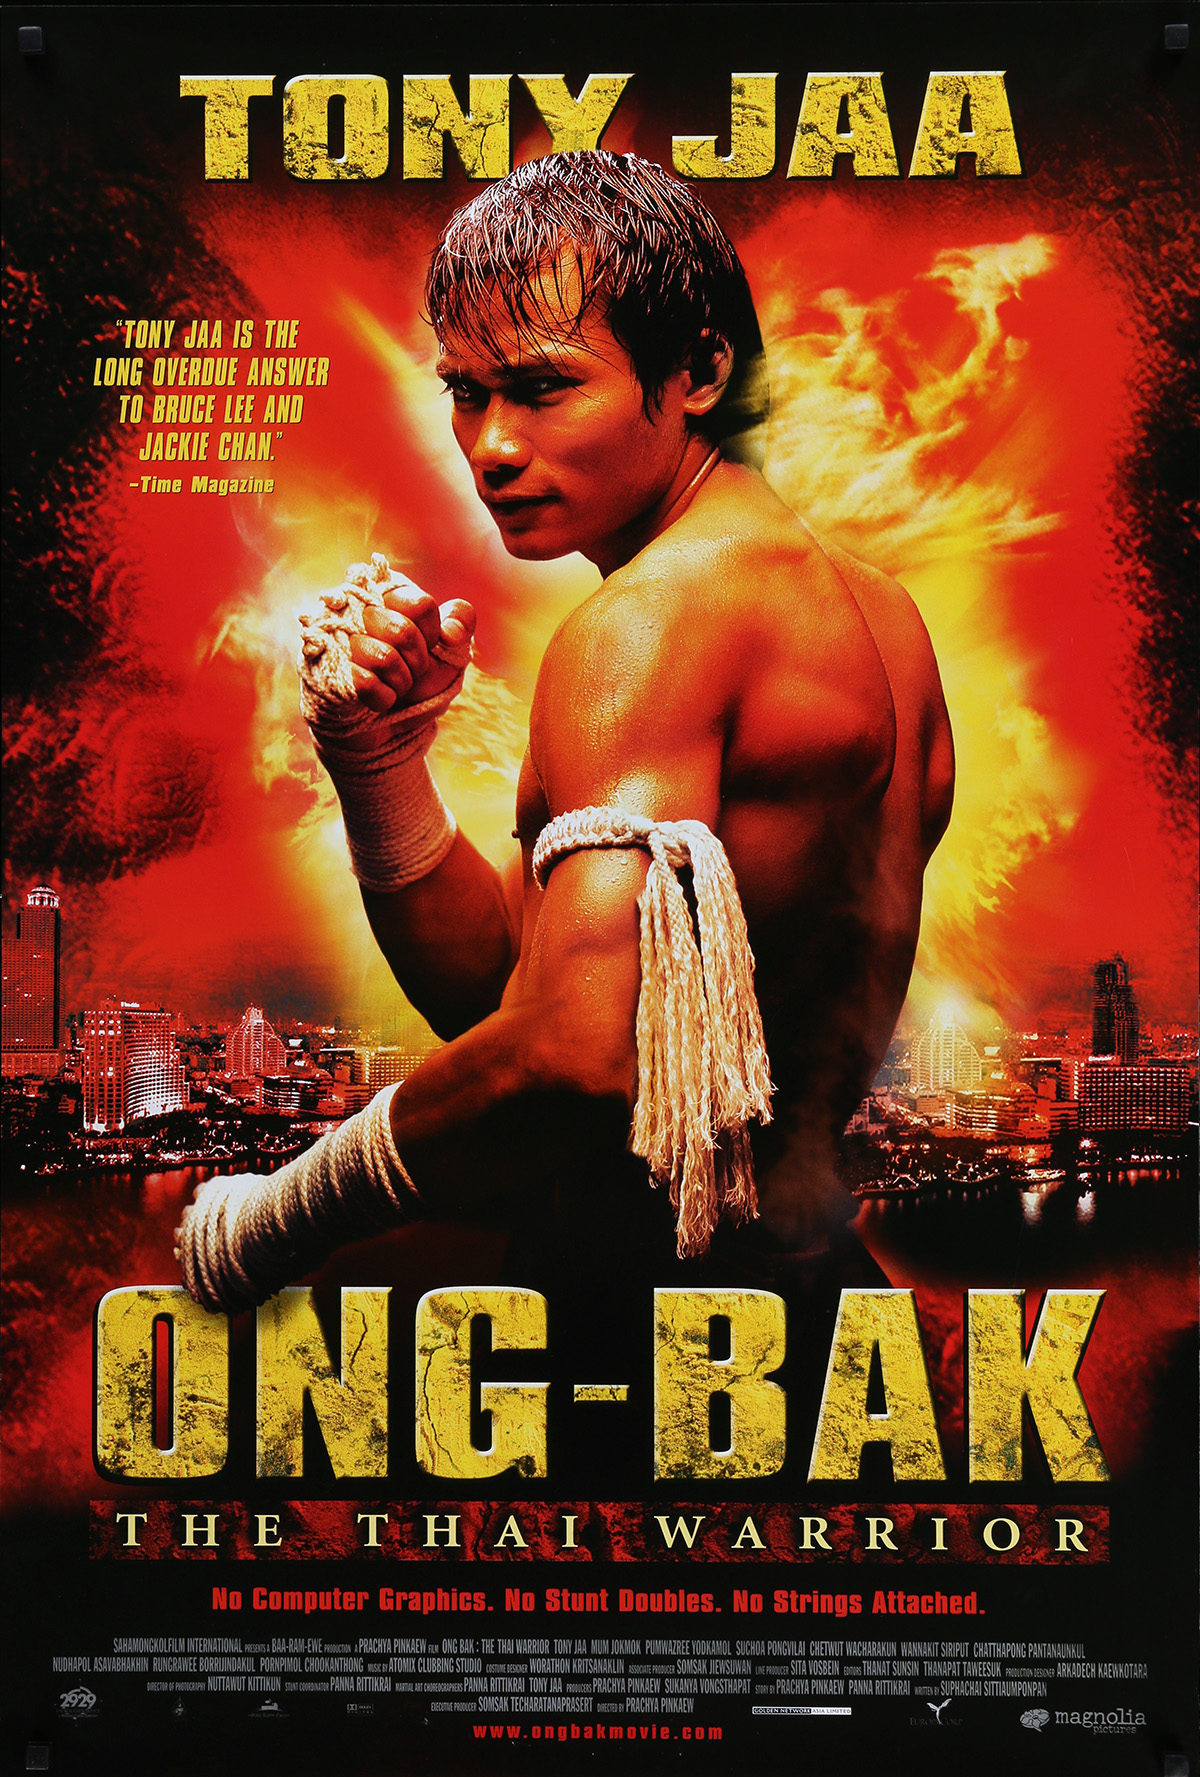 Born to fight full movie download in english free